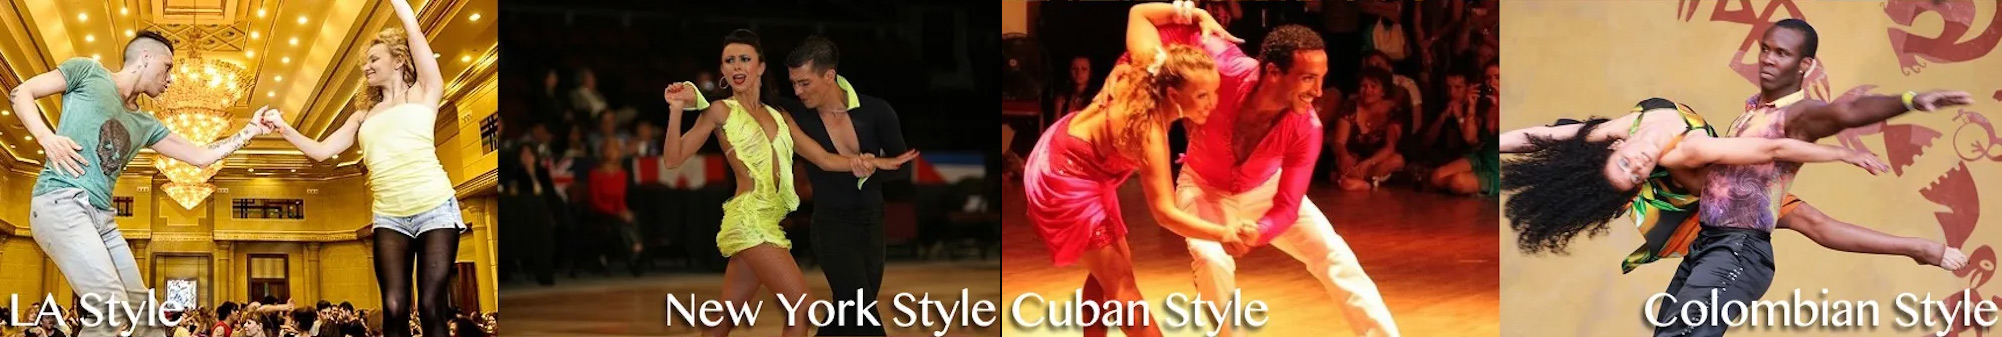 different salsa dancing styles